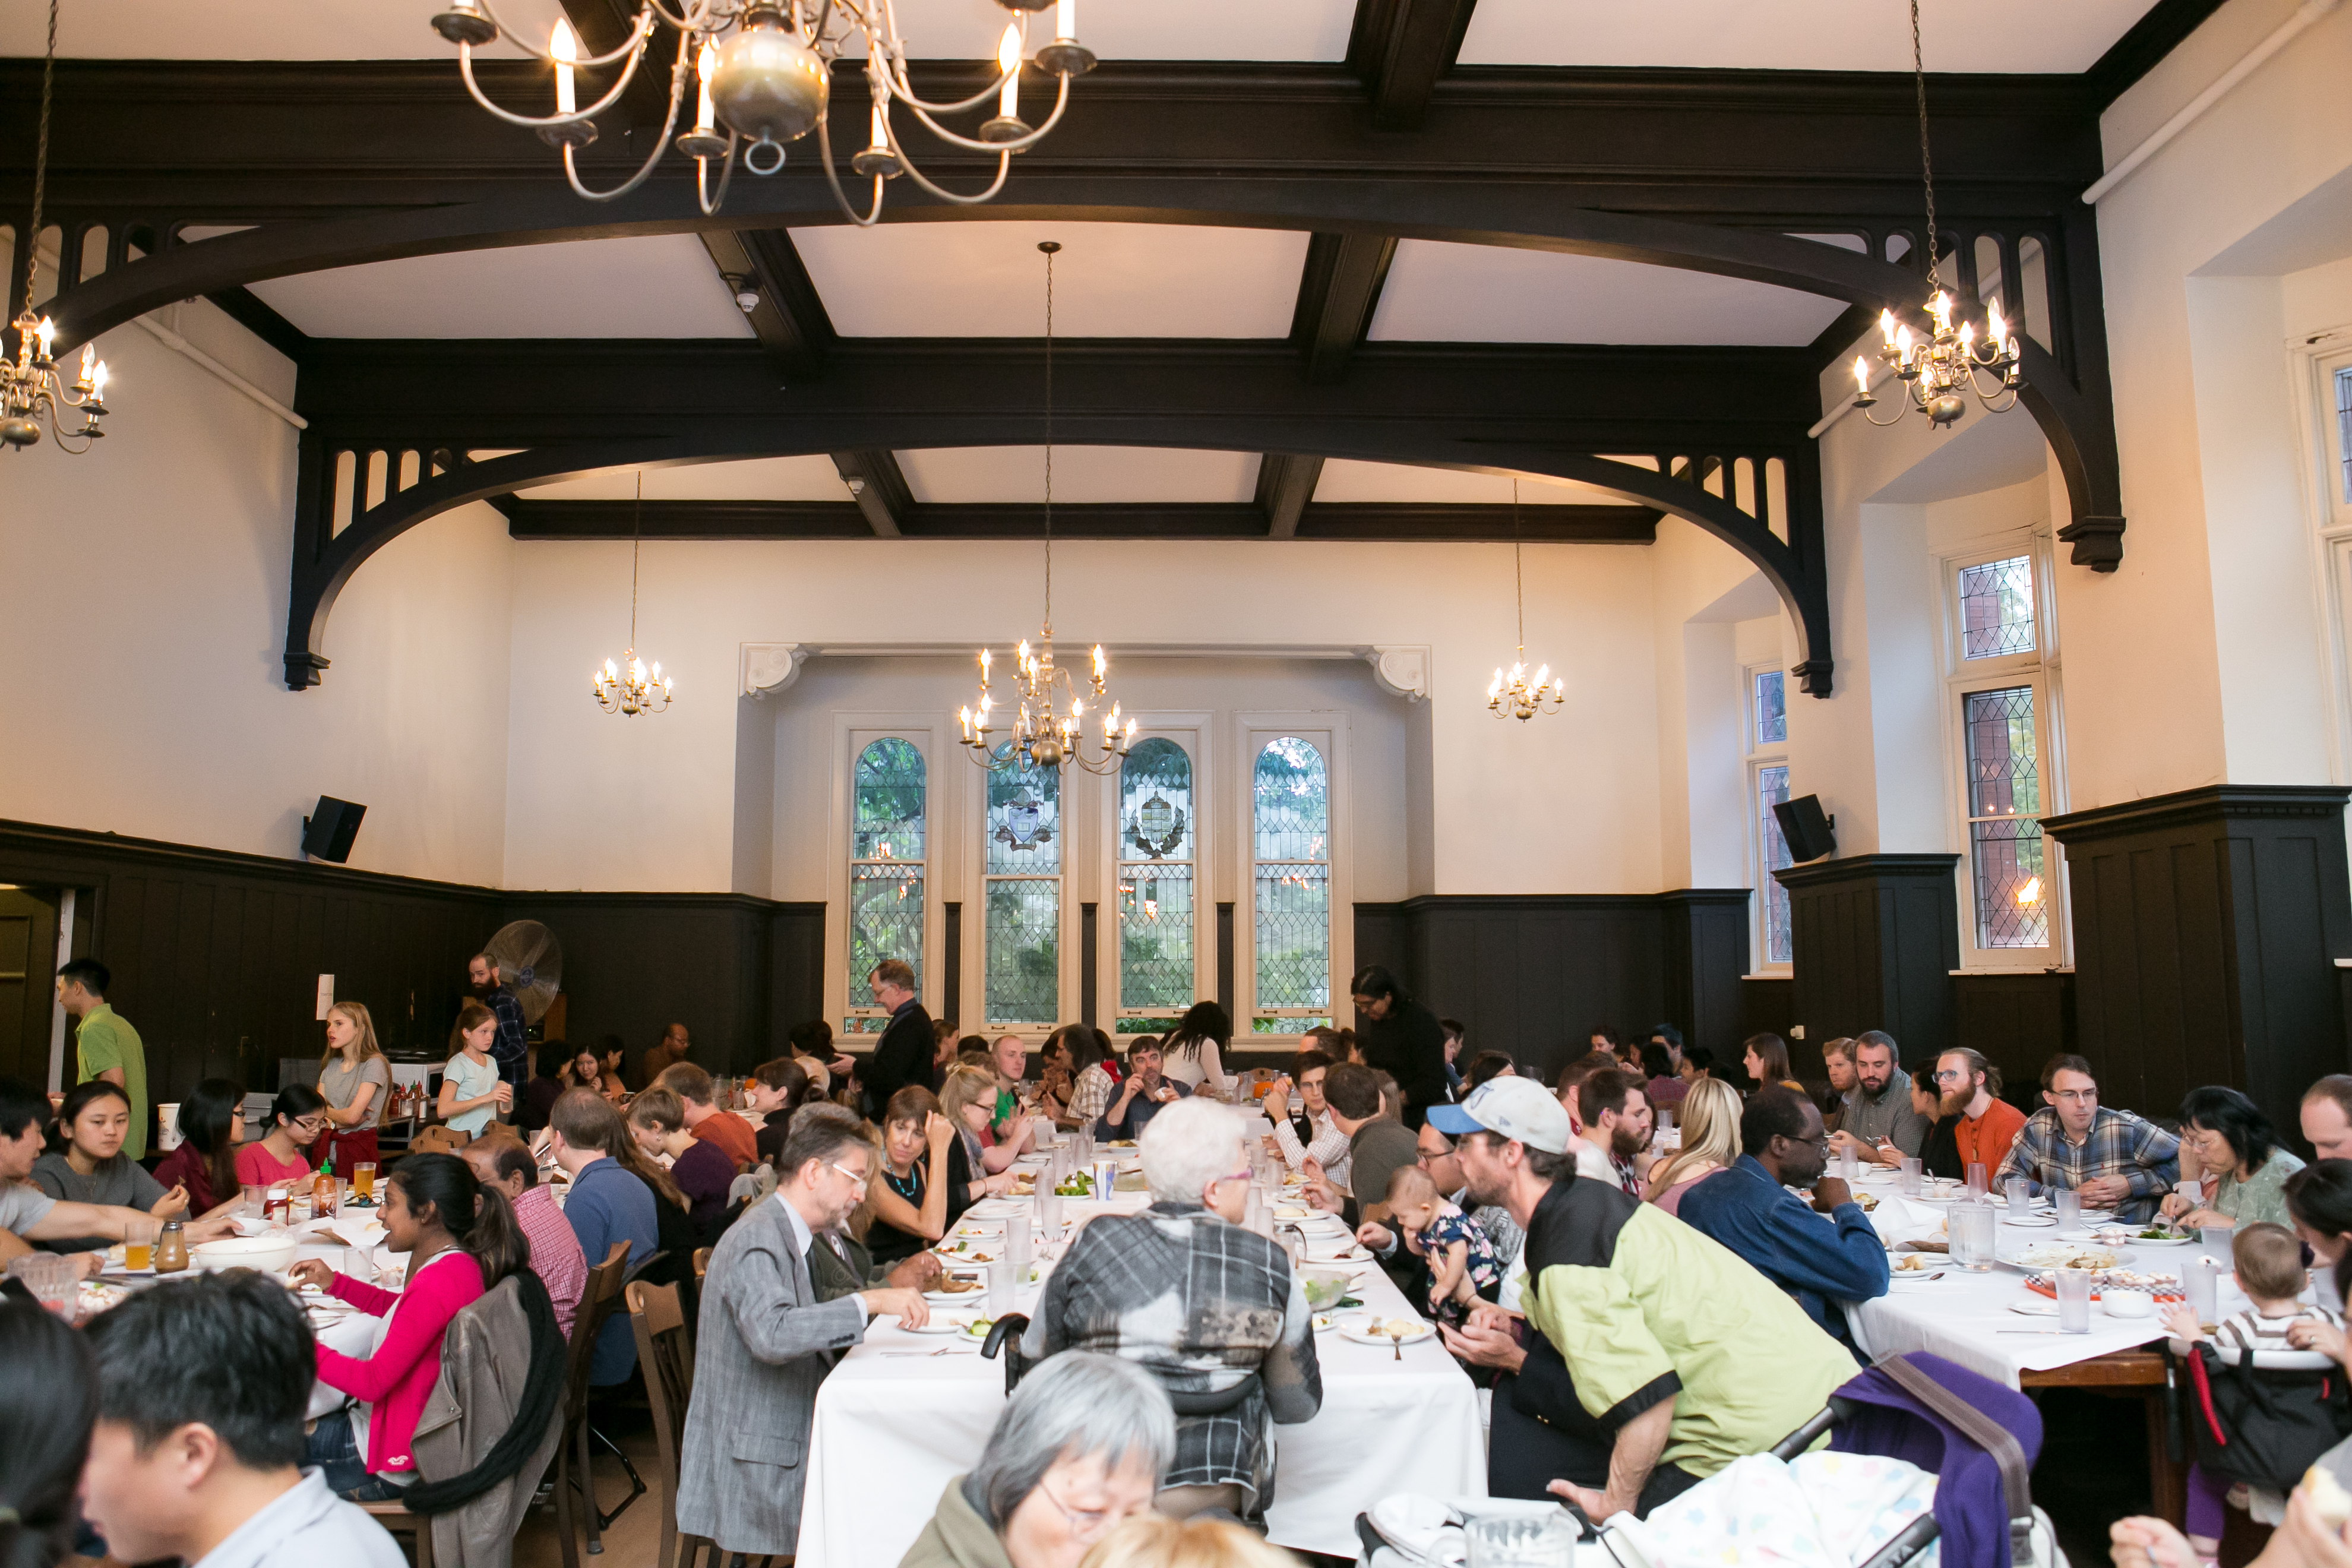 The Refectory - Community dinner